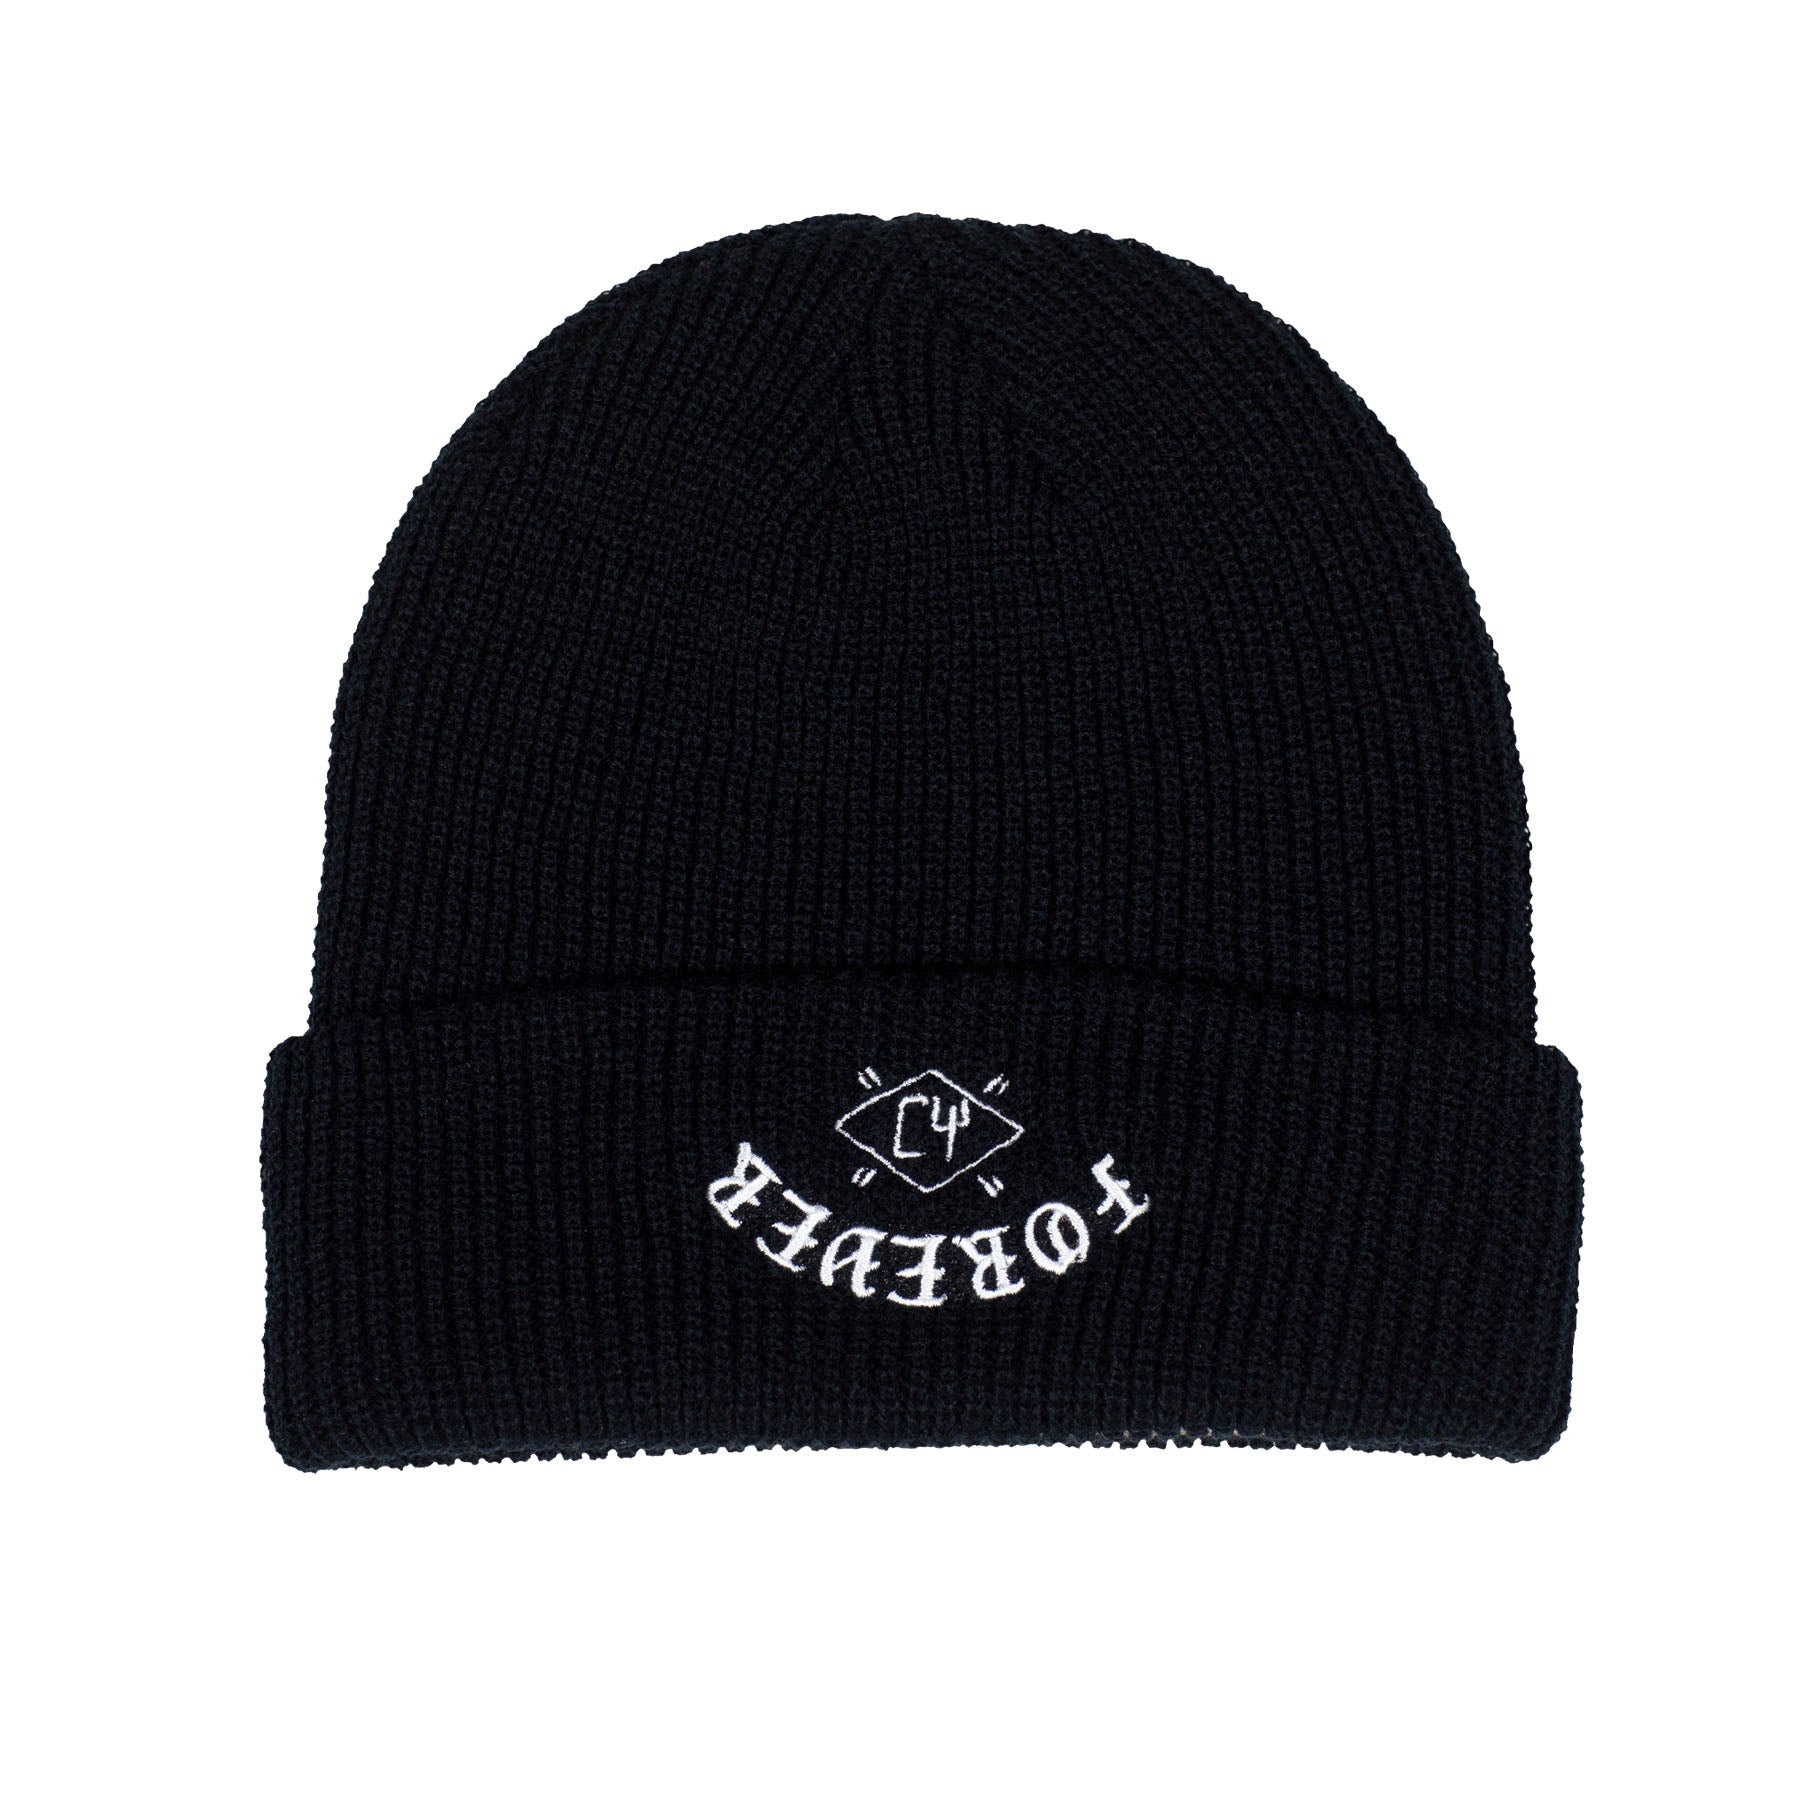 FOREVER BEANIE - commonyouthbrand